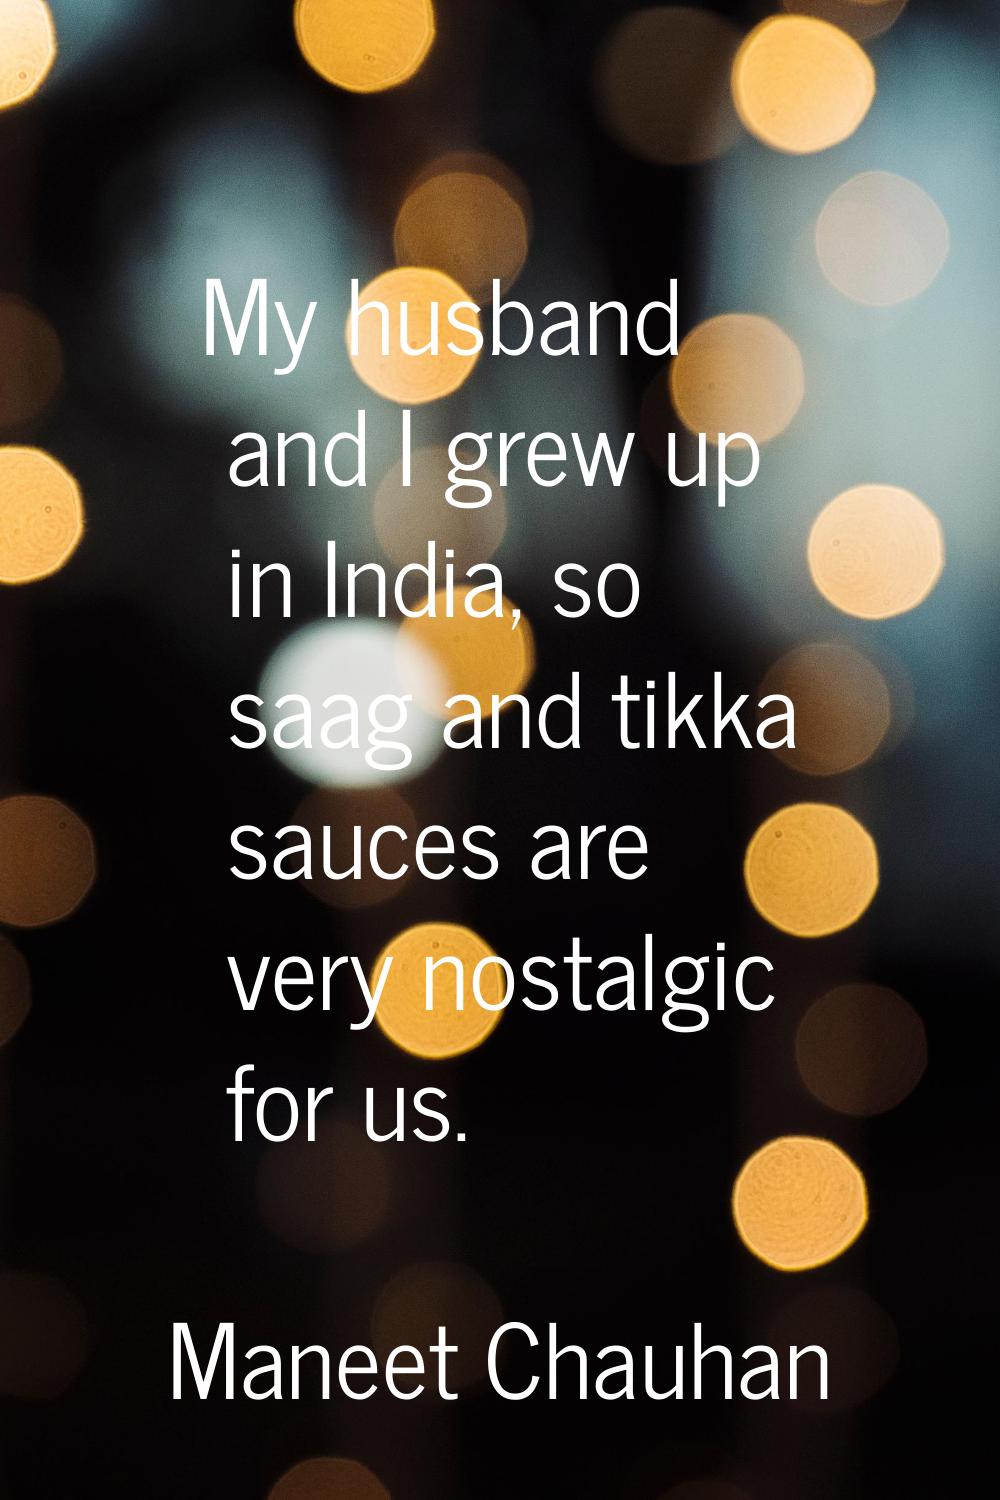 My husband and I grew up in India, so saag and tikka sauces are very nostalgic for us.